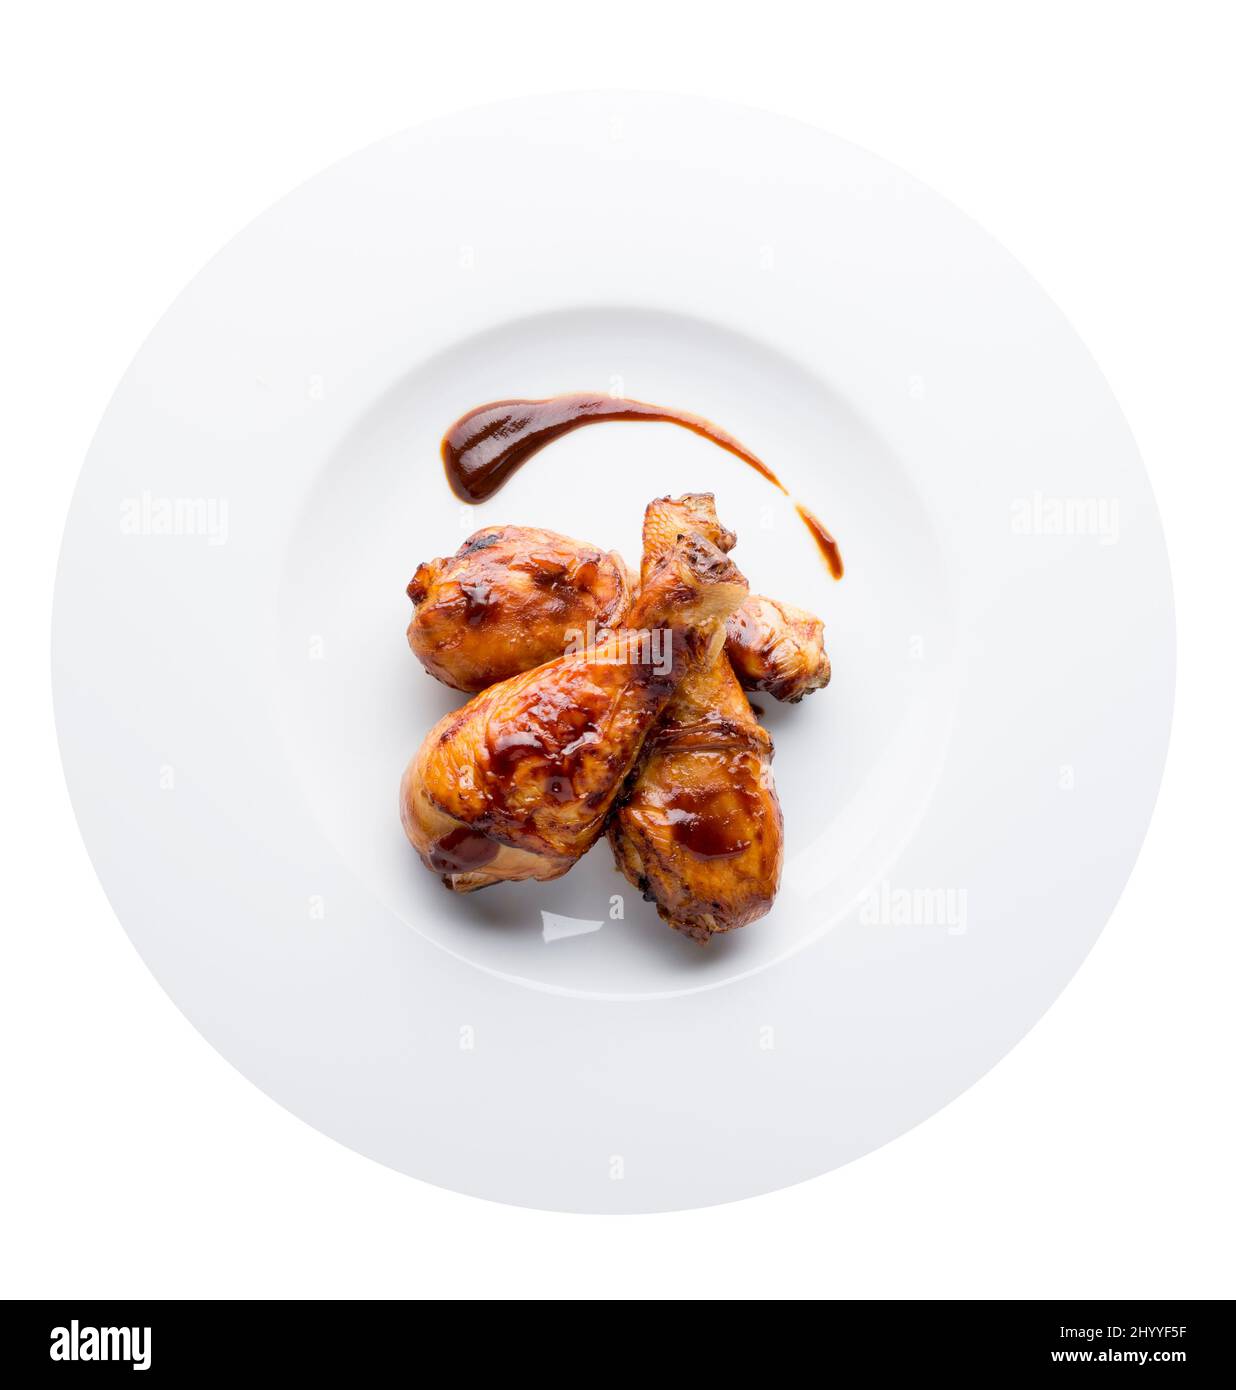 Roasted chicken legs with barbecue sause on white background plate. Top view. Aerial Stock Photo